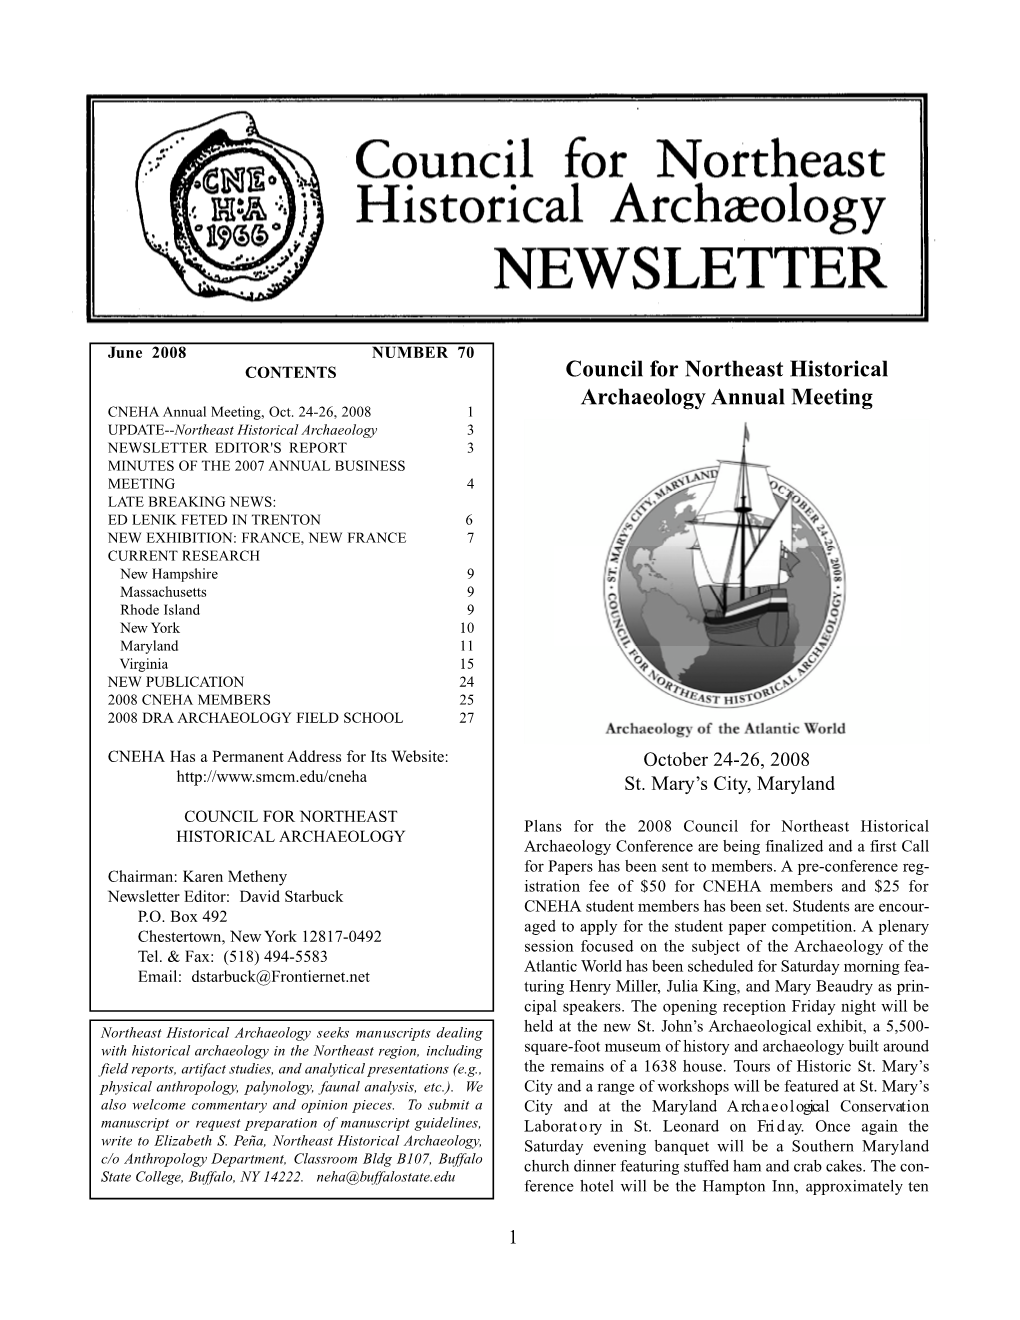 Council for Northeast Historical Archaeology Annual Meeting CNEHA Annual Meeting, Oct